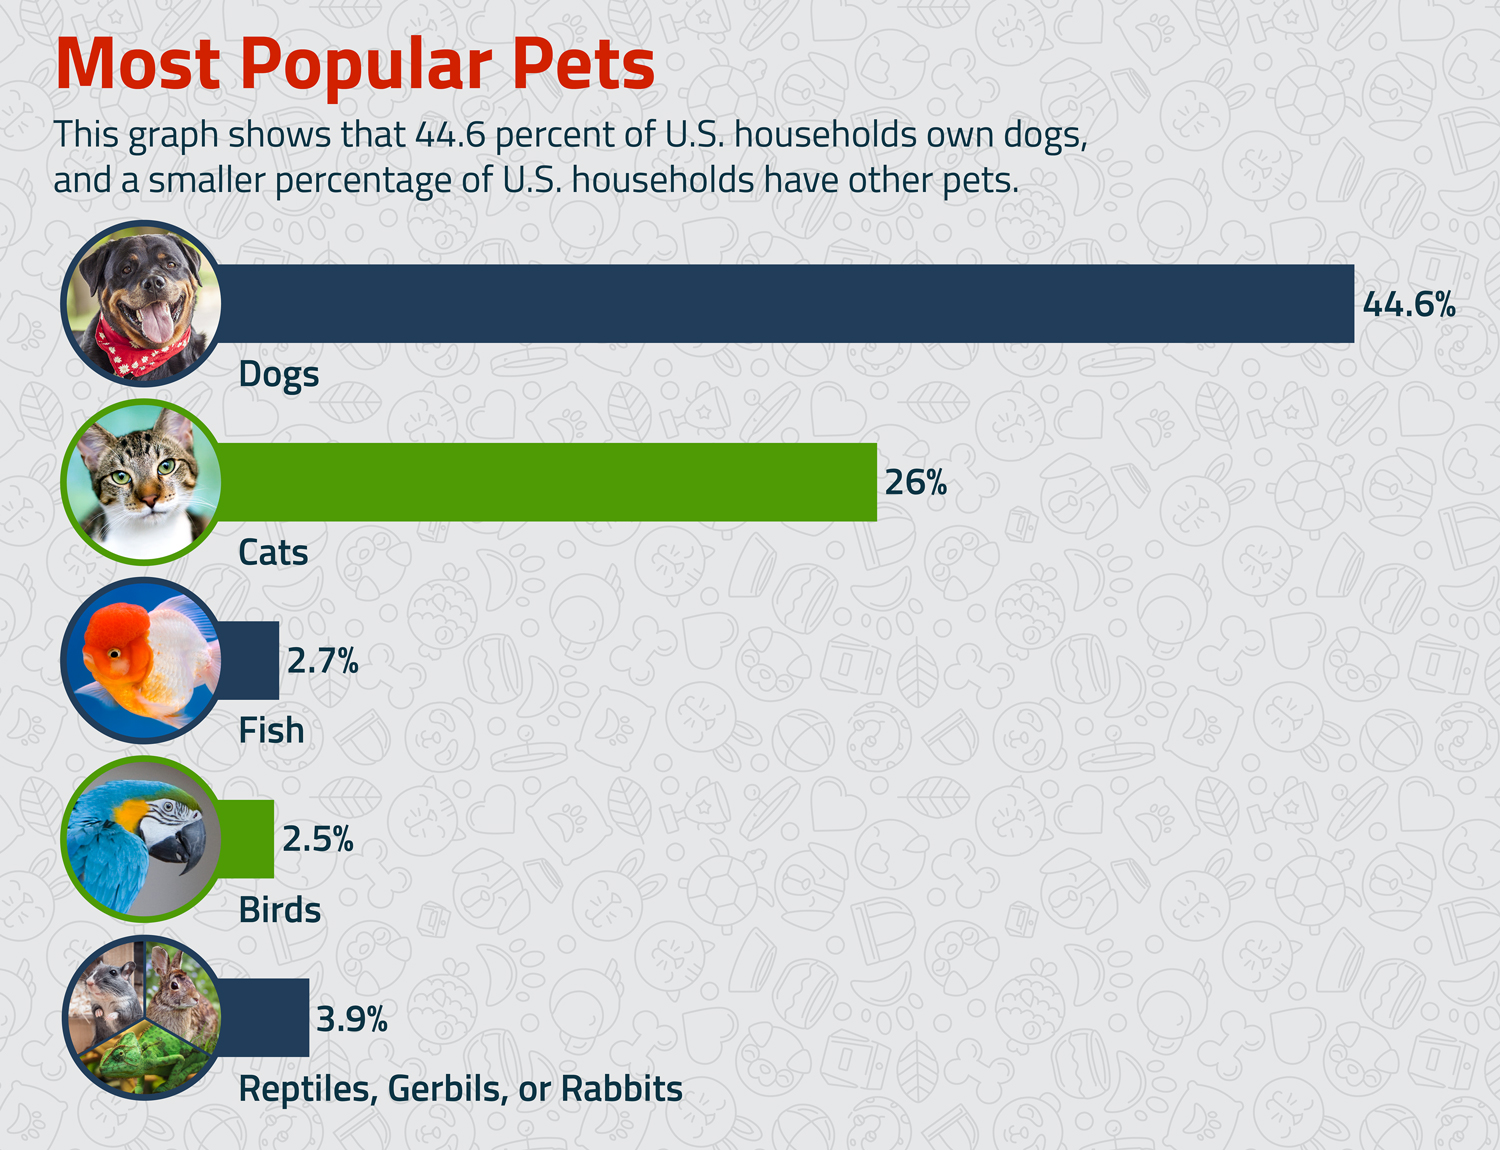 A bar graph called Most Popular Pets shows the percentage of U S households owning dogs, cats, fish, birds, and reptiles, gerbils, or rabbits.